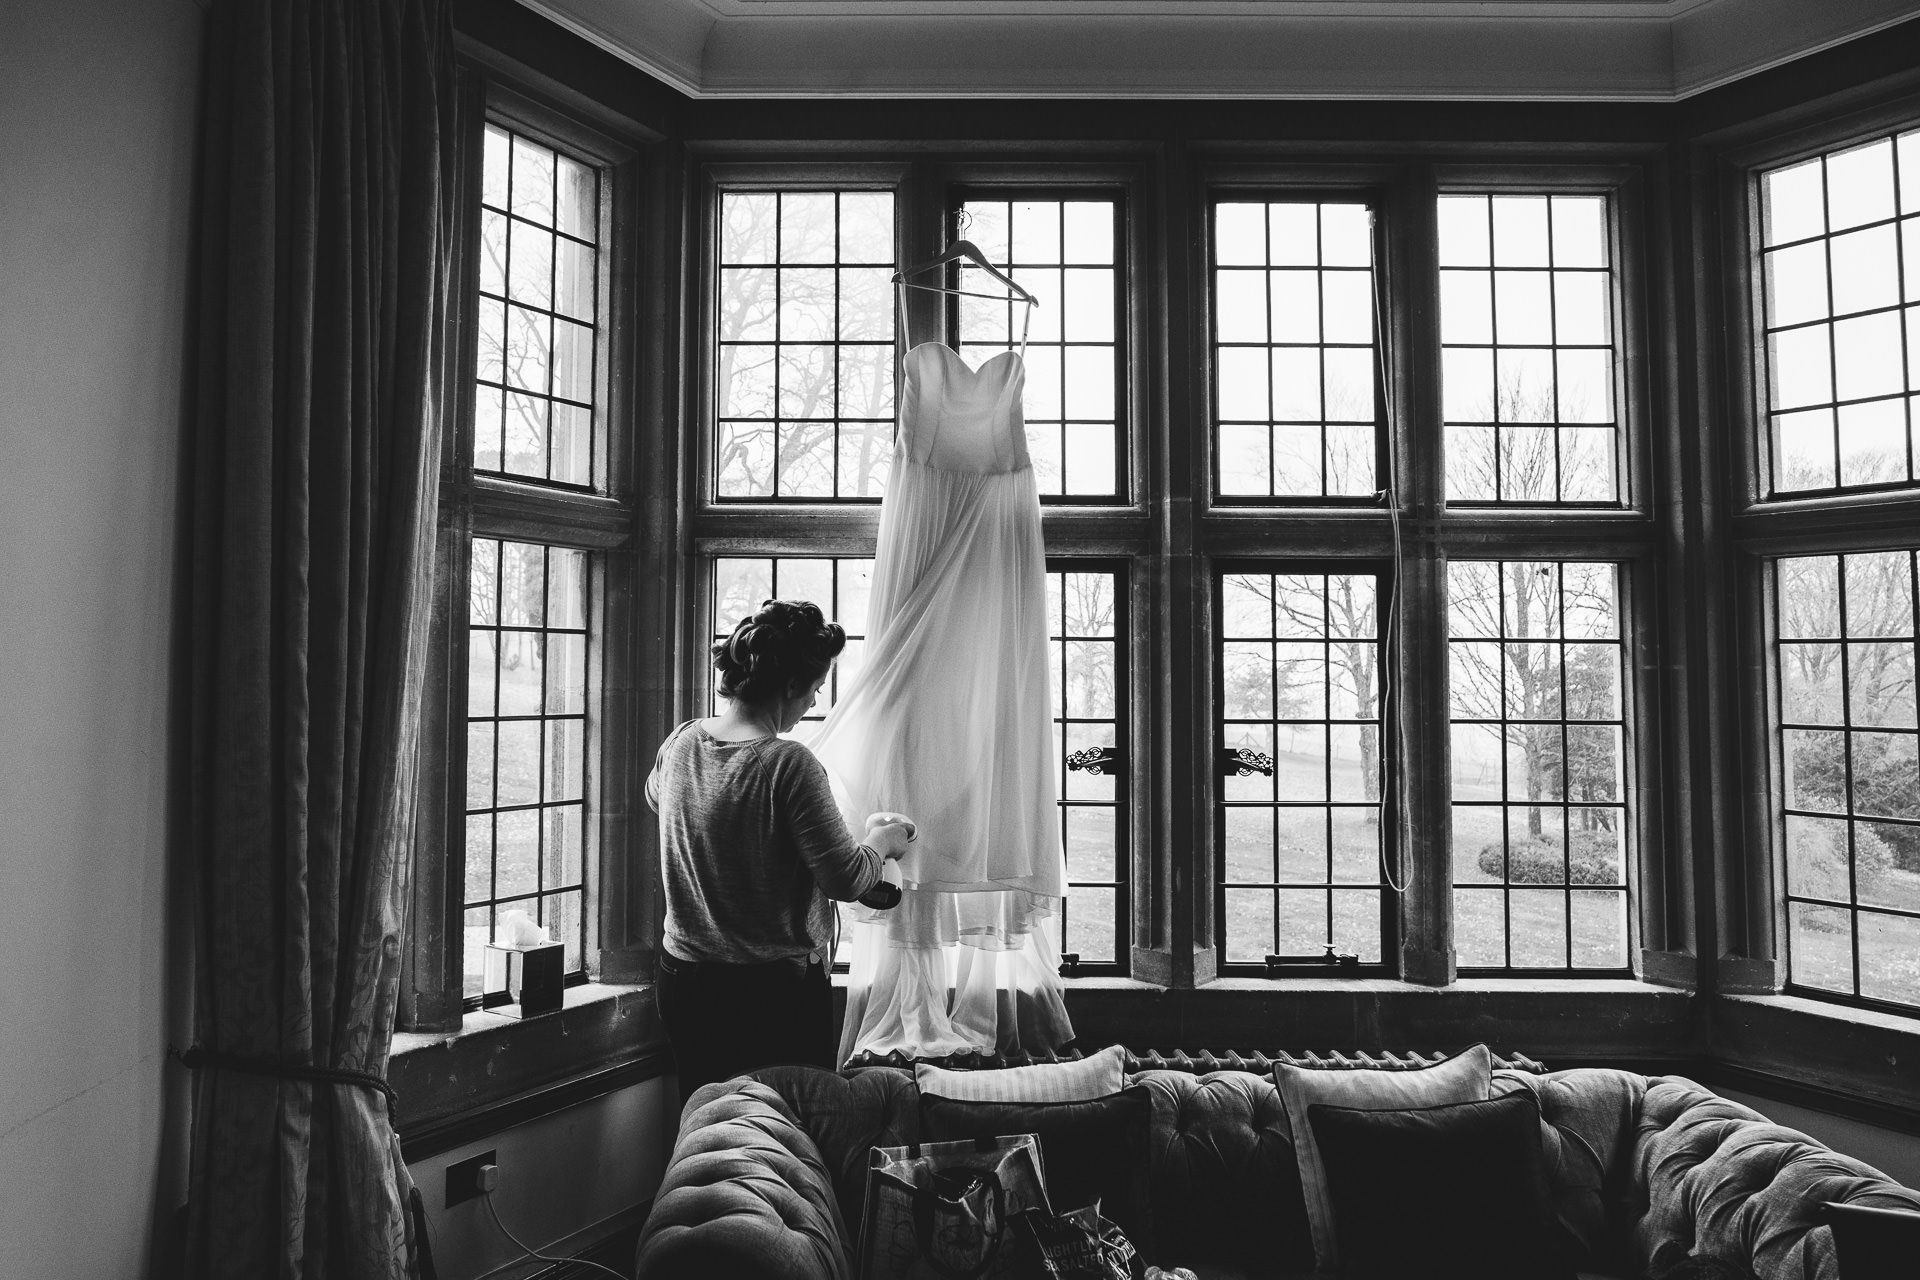 Bride-to-be steaming a wedding dress hanging in a window